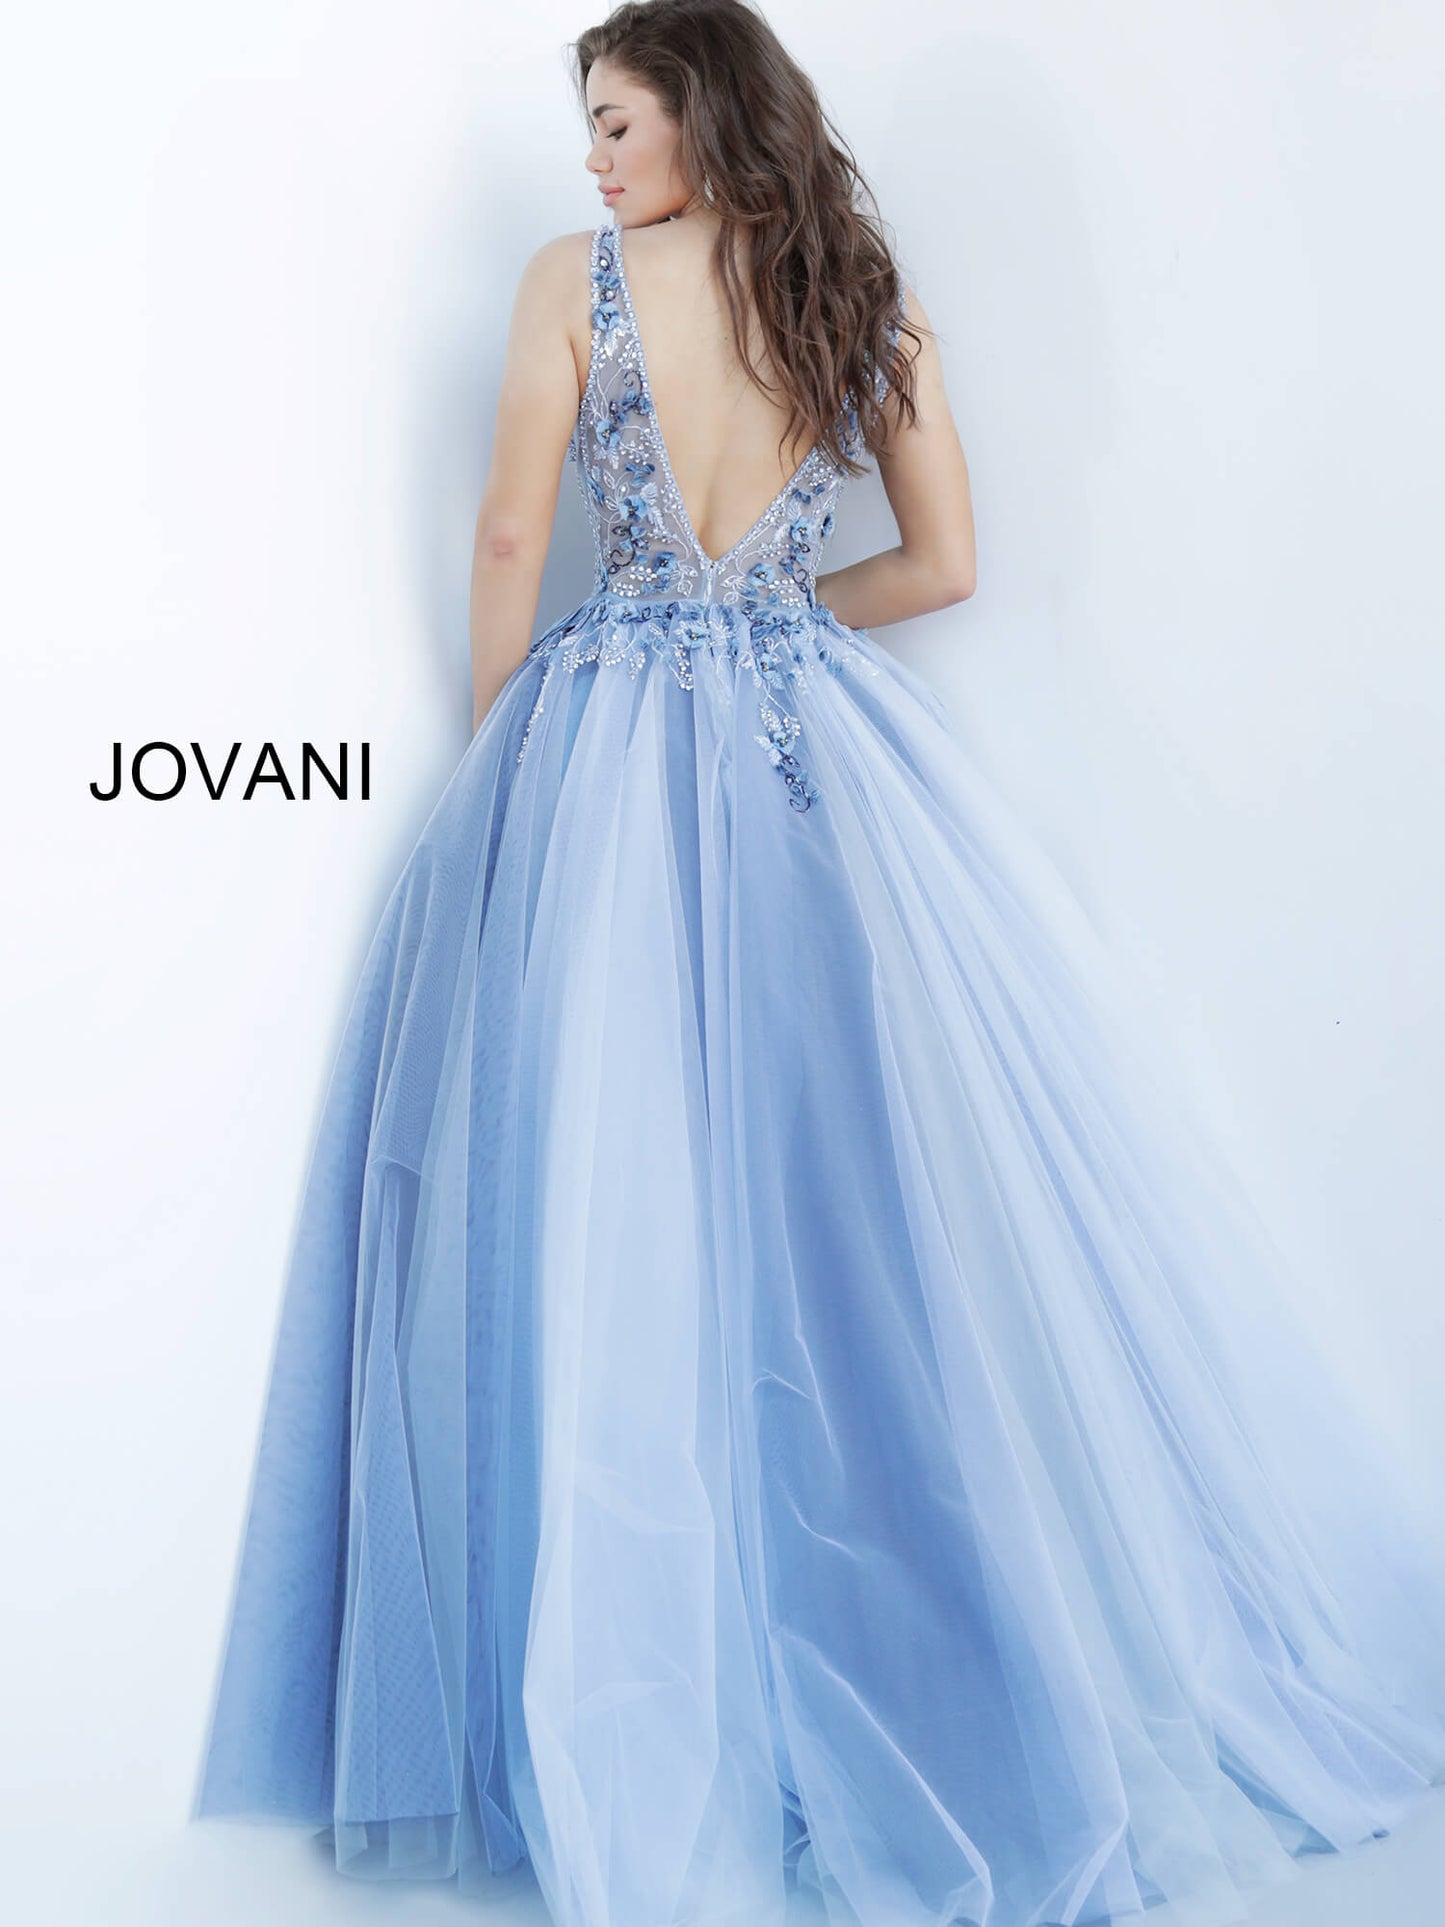 Jovani 3110 is a stunning tulle ball gown Prom Dress. Embellished 3D Floral Appliques on Sheer Illusion Bodice. Deep V Neckline & Back.  This gown would be a Perfect Sexy Wedding Dress In Ivory!  Available Sizes: 00, 0, 2, 4, 6, 8, 10, 12, 14, 16, 18, 20, 22, 24  Available Colors: blue, ivory, red